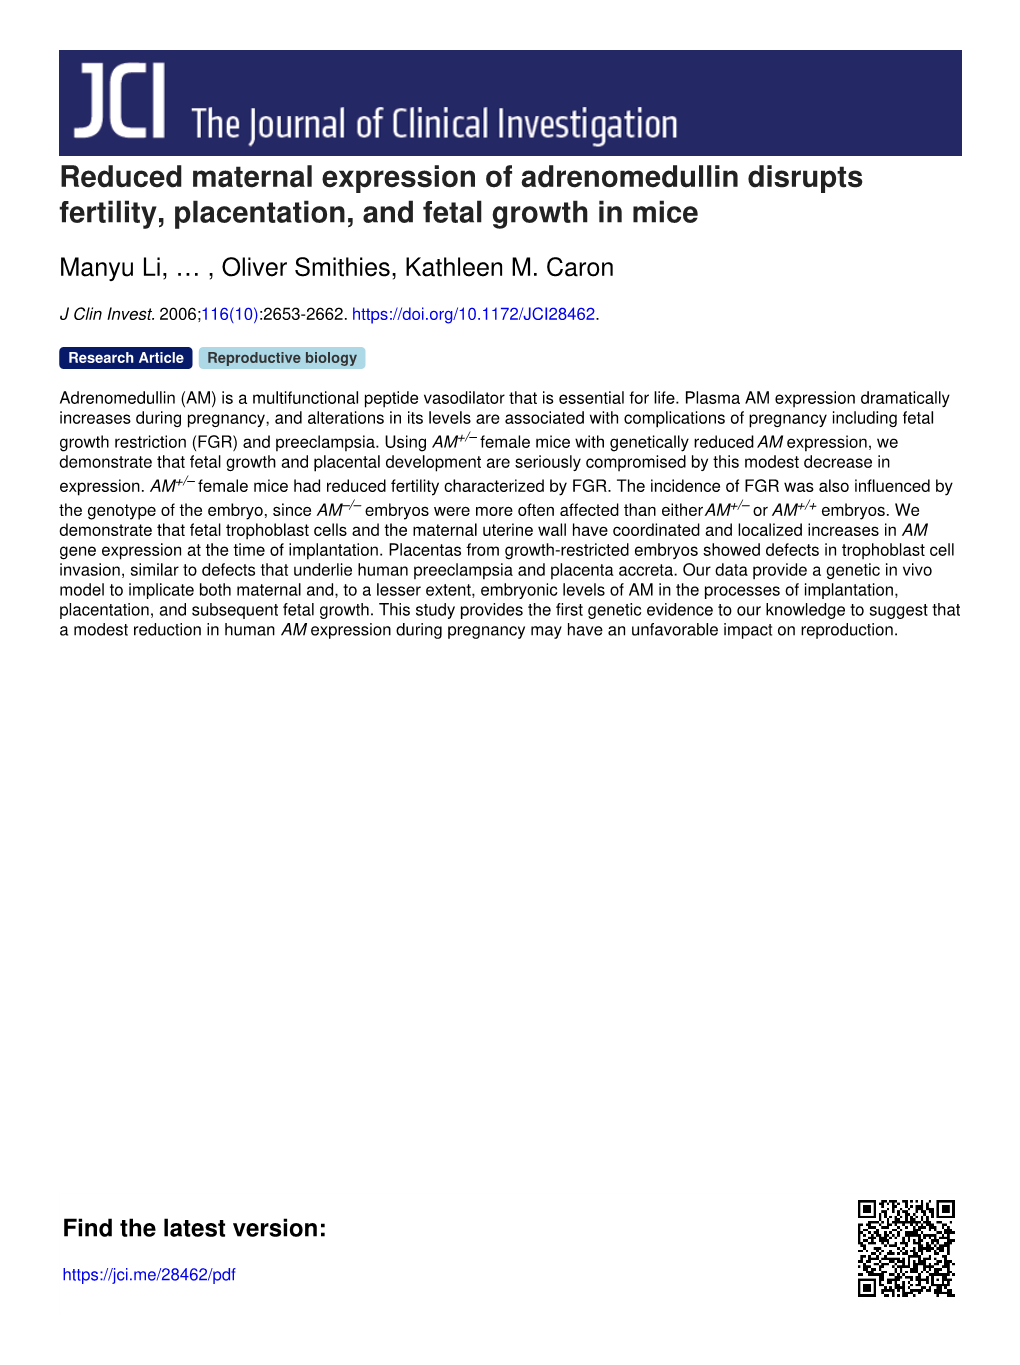 Reduced Maternal Expression of Adrenomedullin Disrupts Fertility, Placentation, and Fetal Growth in Mice